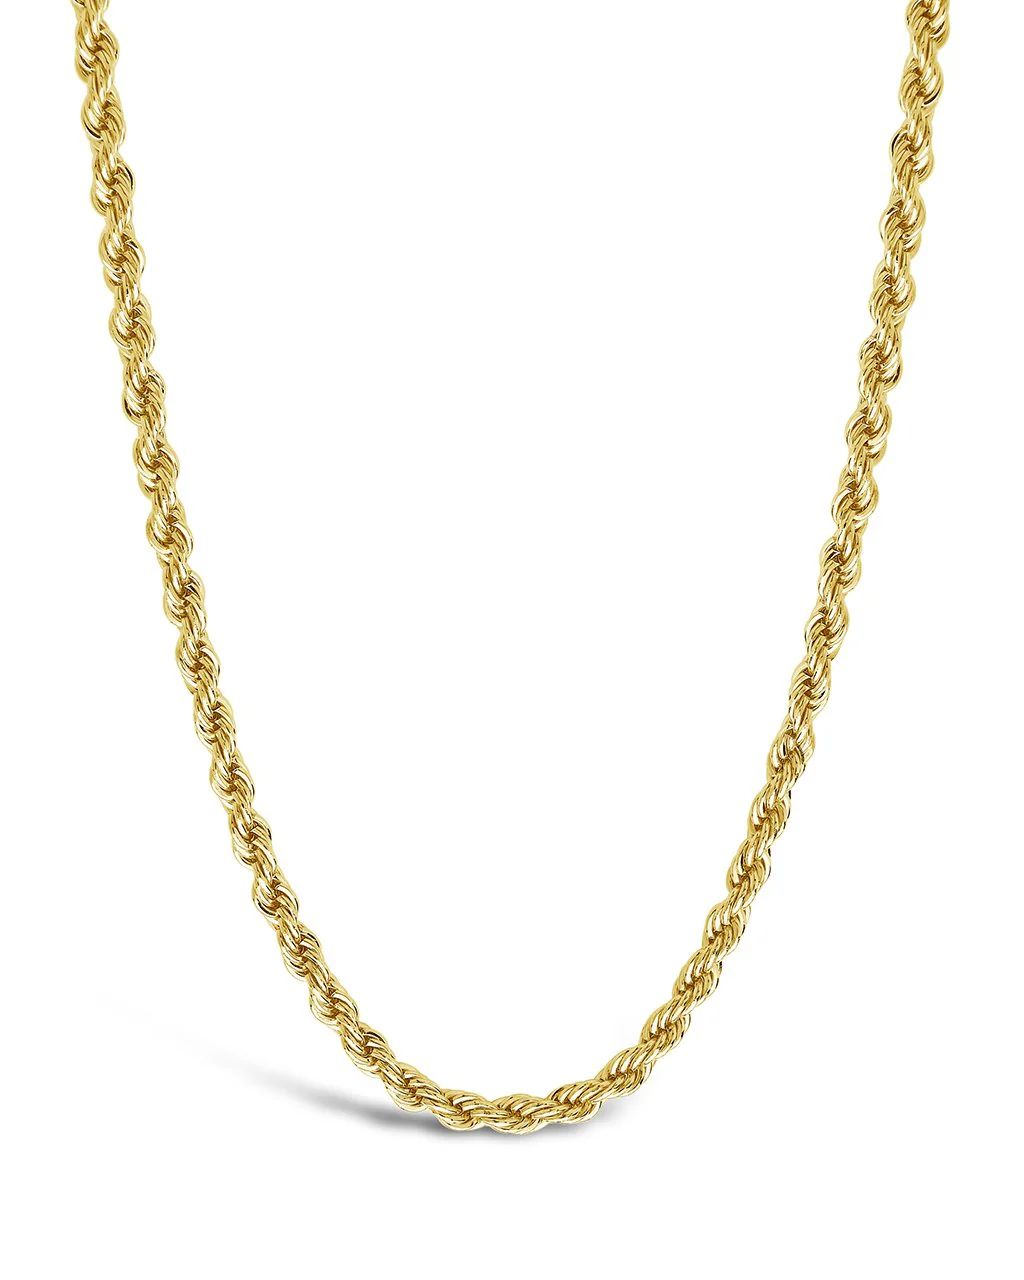 Rope Braided Twist Chain Necklace | Sterling Forever